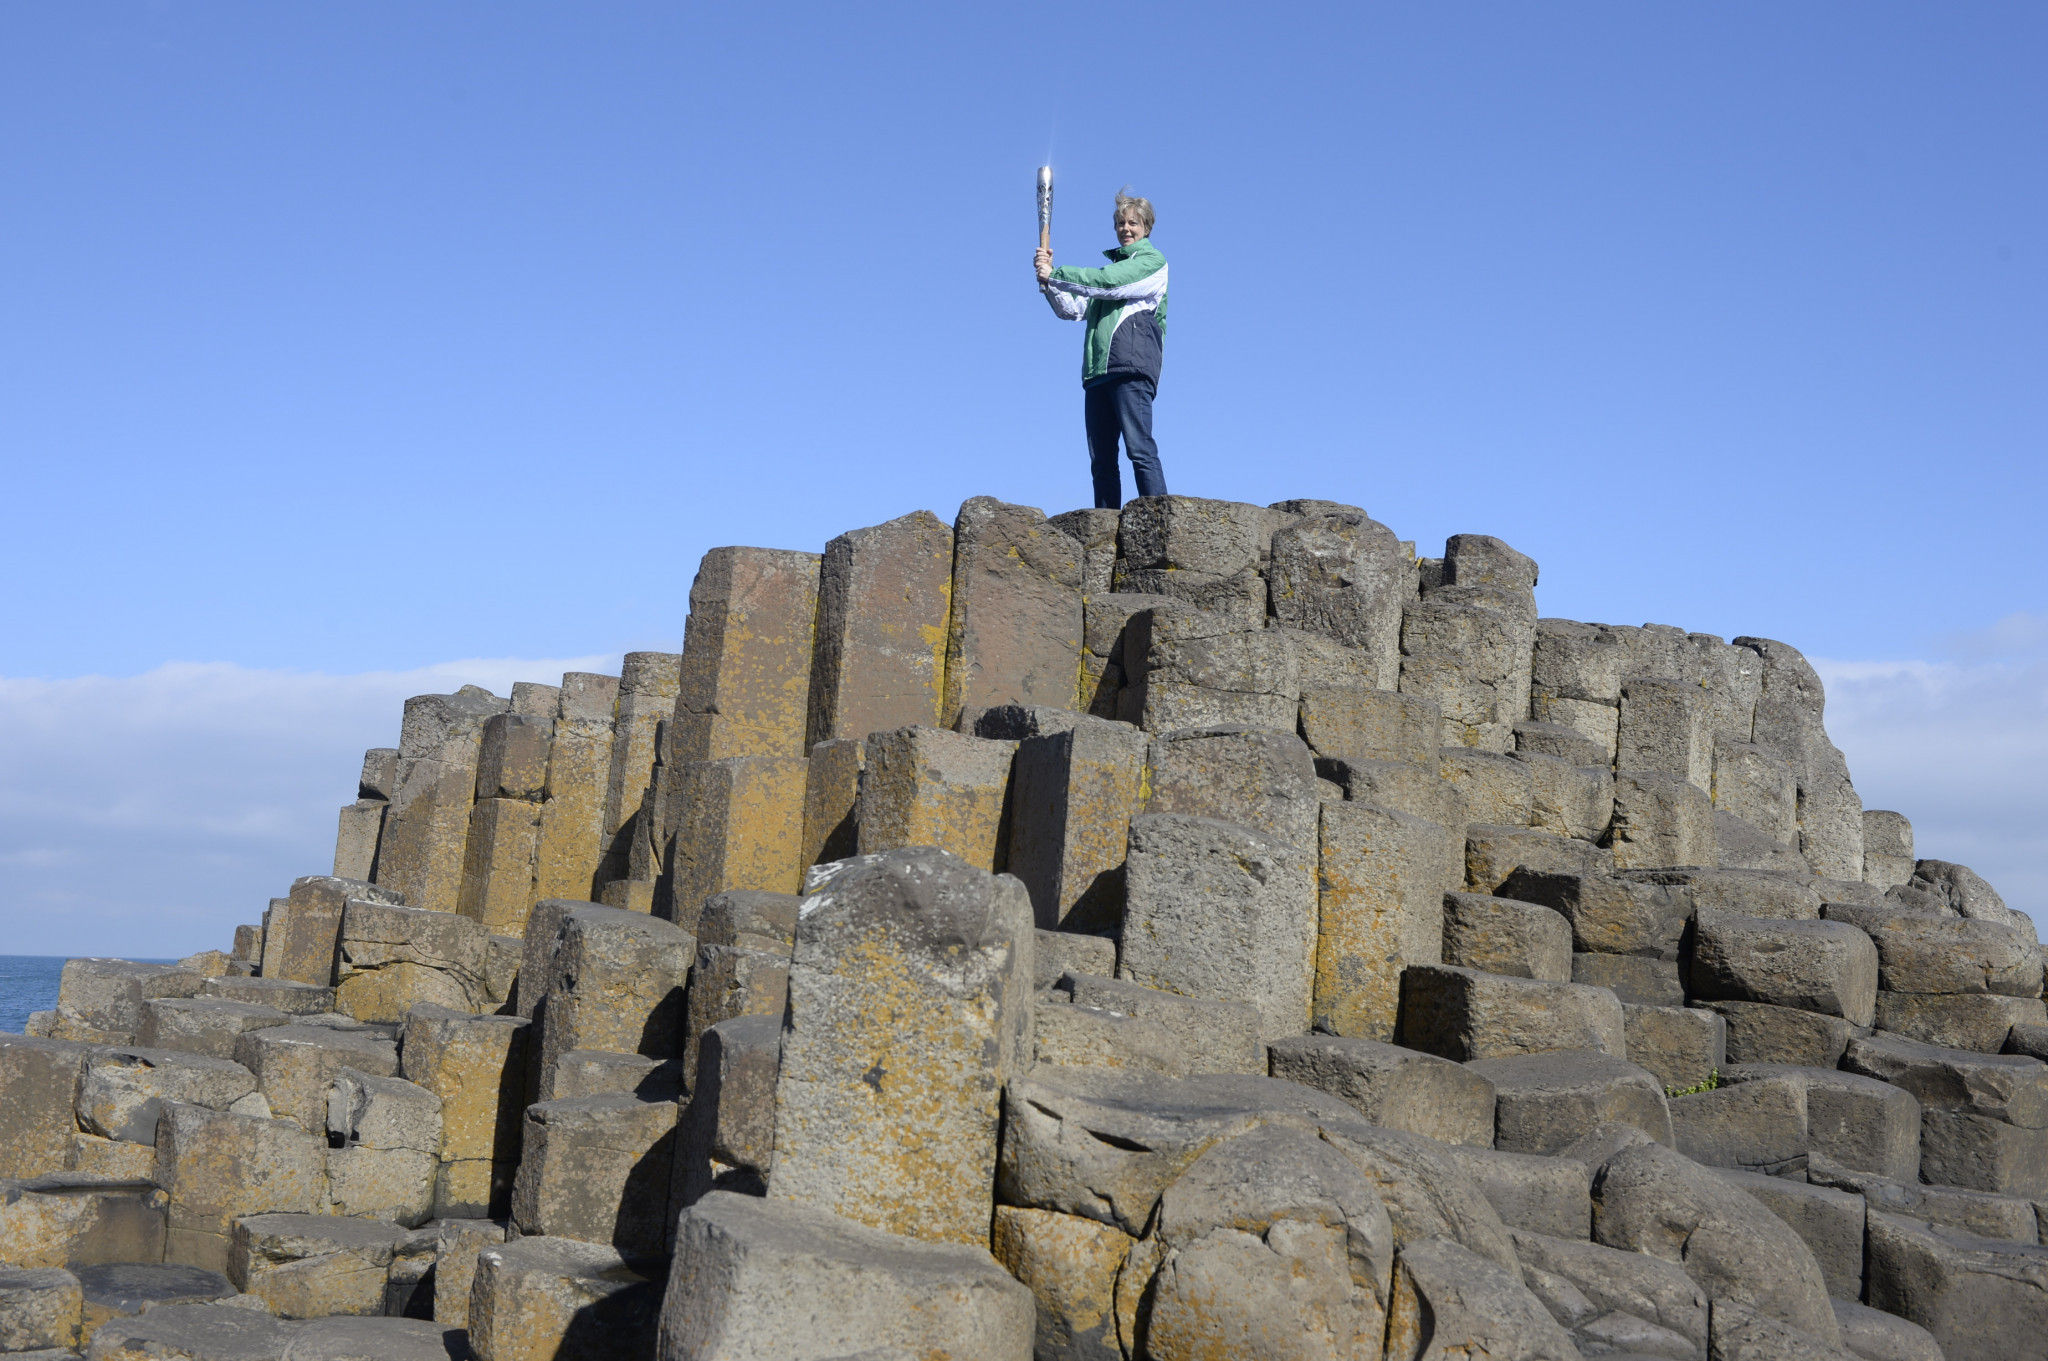 Alison Moffitt-Robinson at the Giant's Causeway, with the Glasgow 2014 Commonwealth Games baton ©Getty Images